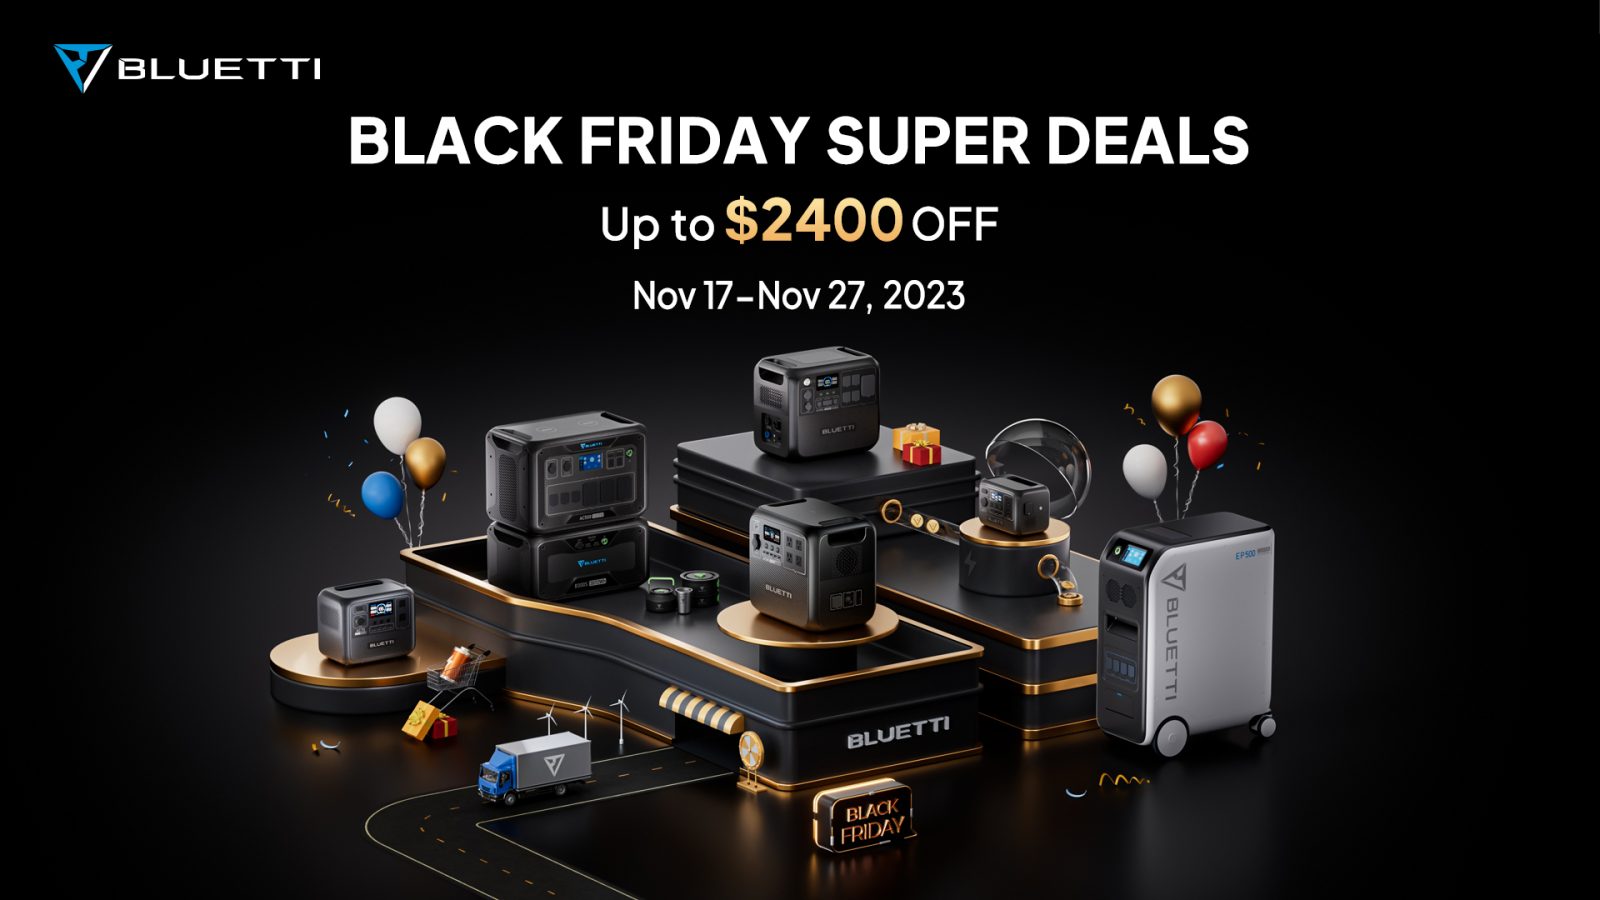 Bluetti offering special discounts on its portable power stations during Black Friday